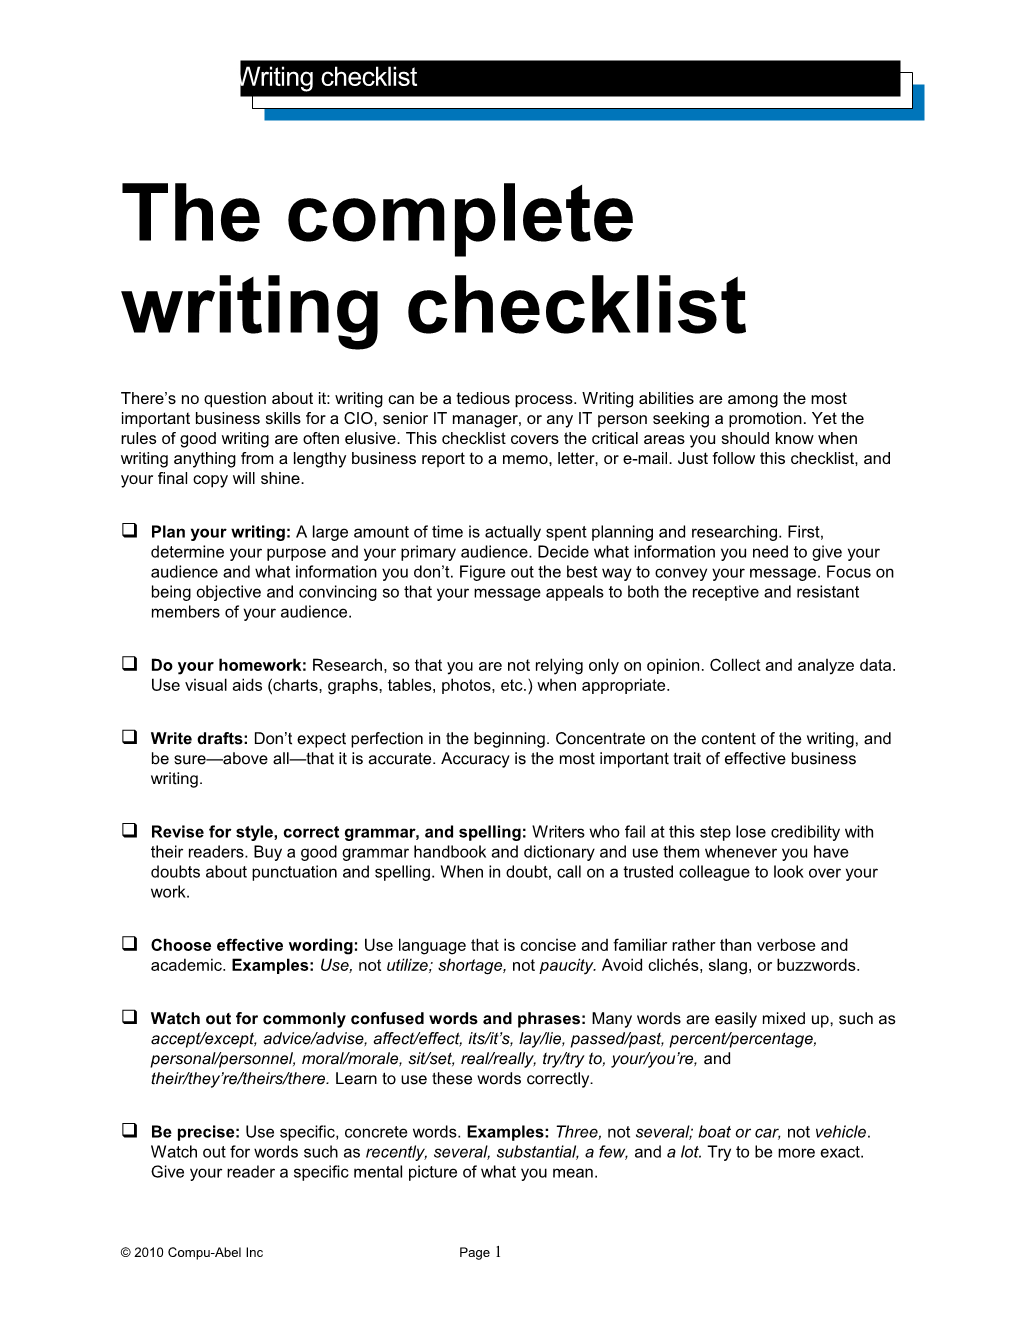 The Complete Writing Checklist